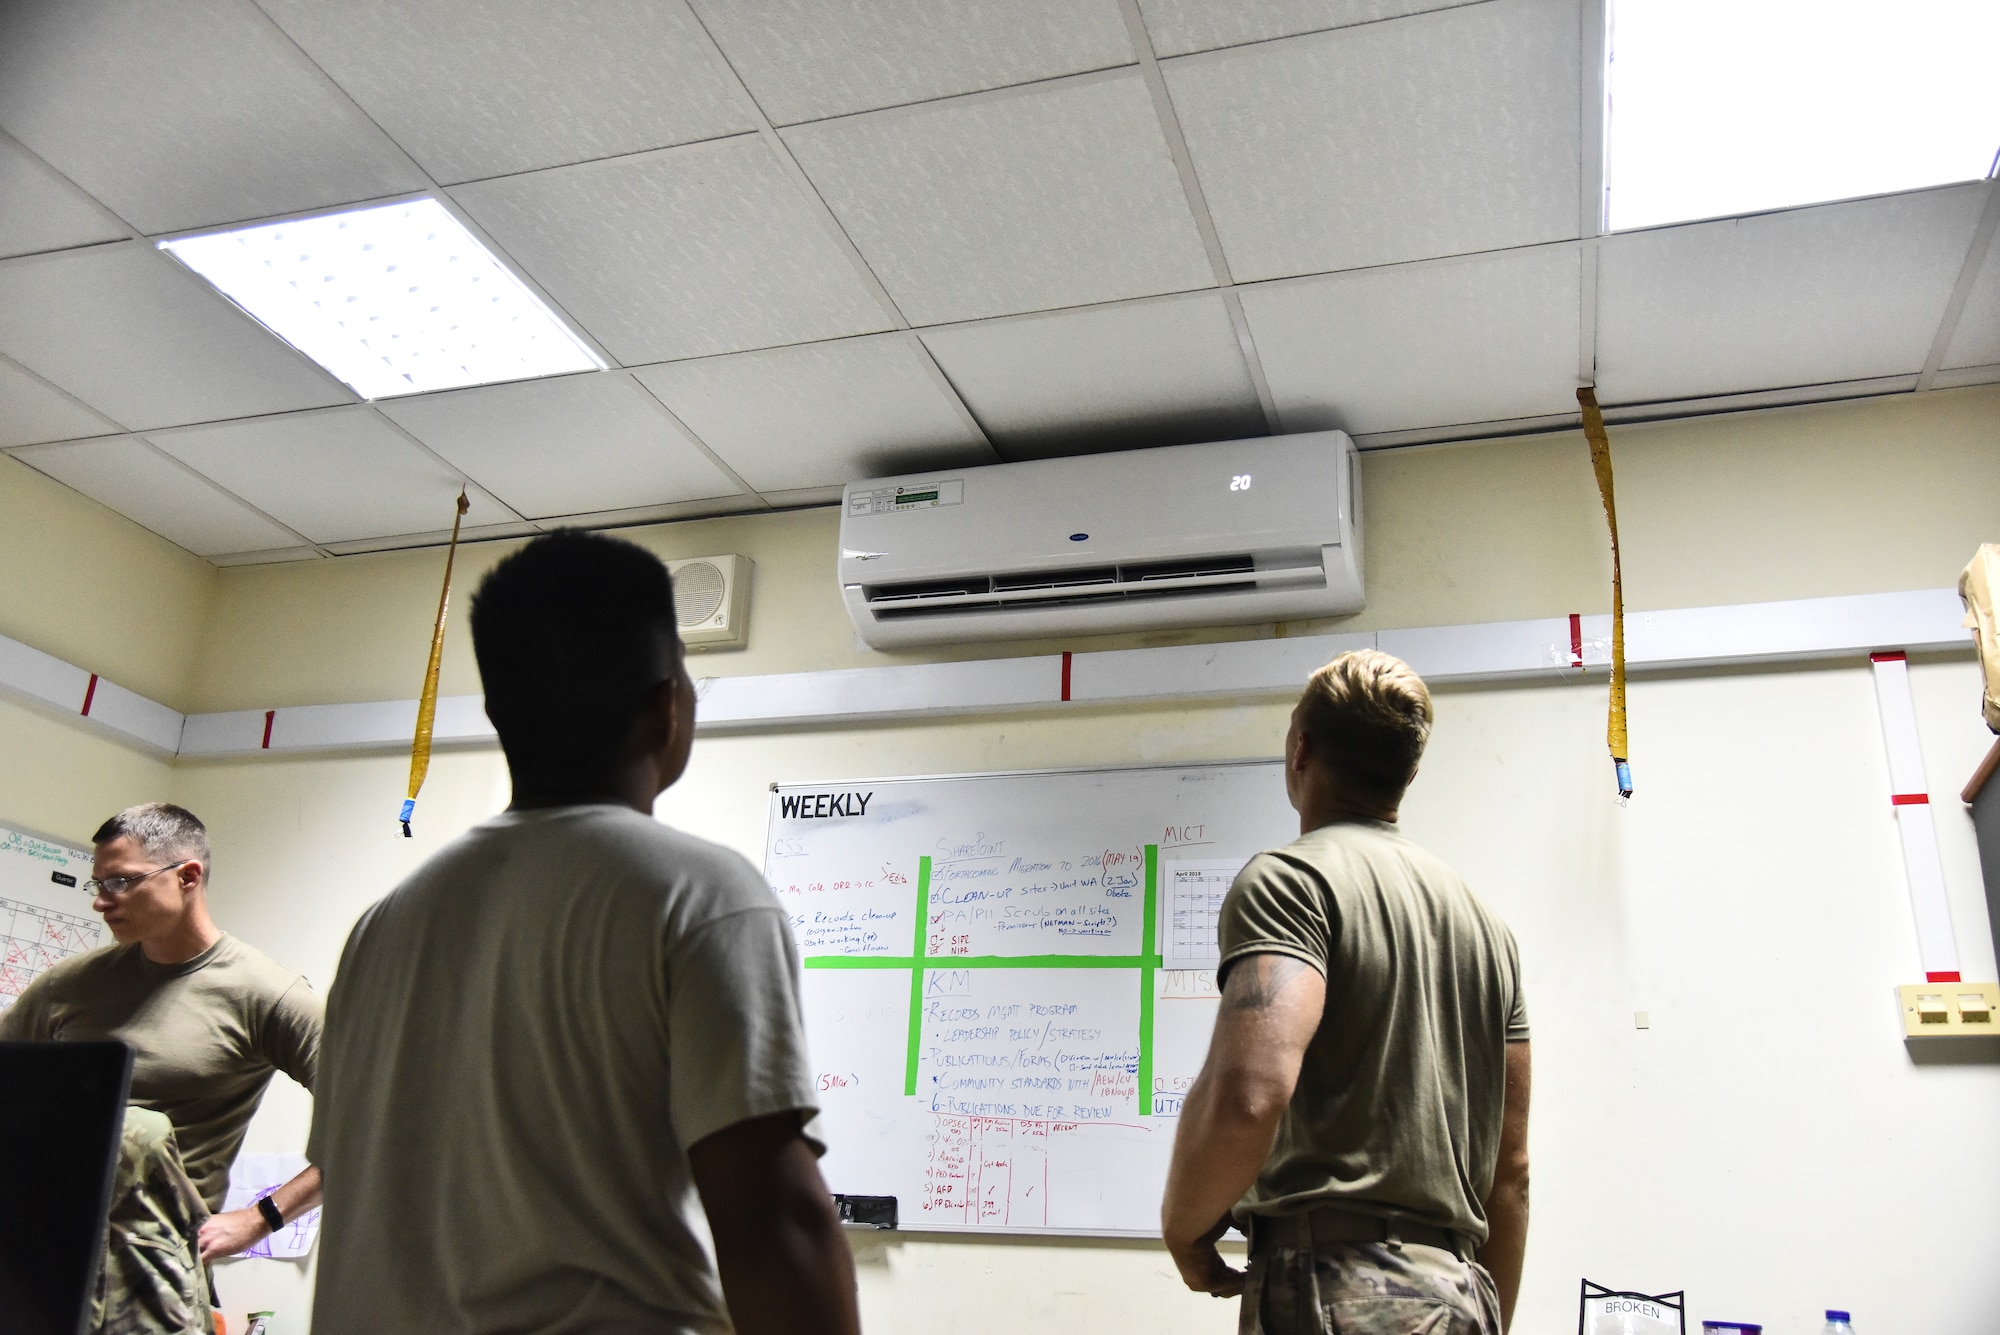 380th Expeditionary Civil Engineer Squadron Heating, Ventilation, Air Conditioning and Refrigeration journeymen, test out a new A/C unit at Al Dhafra Air Base, United Arab Emirates, April 8, 2019. HVAC Airmen monitor systems operation to ensure efficiency and compliance technical orders, manufacturer handbooks, local procedures, codes, and directives. (U.S. Air Force photo by Senior Airman Mya M. Crosby)